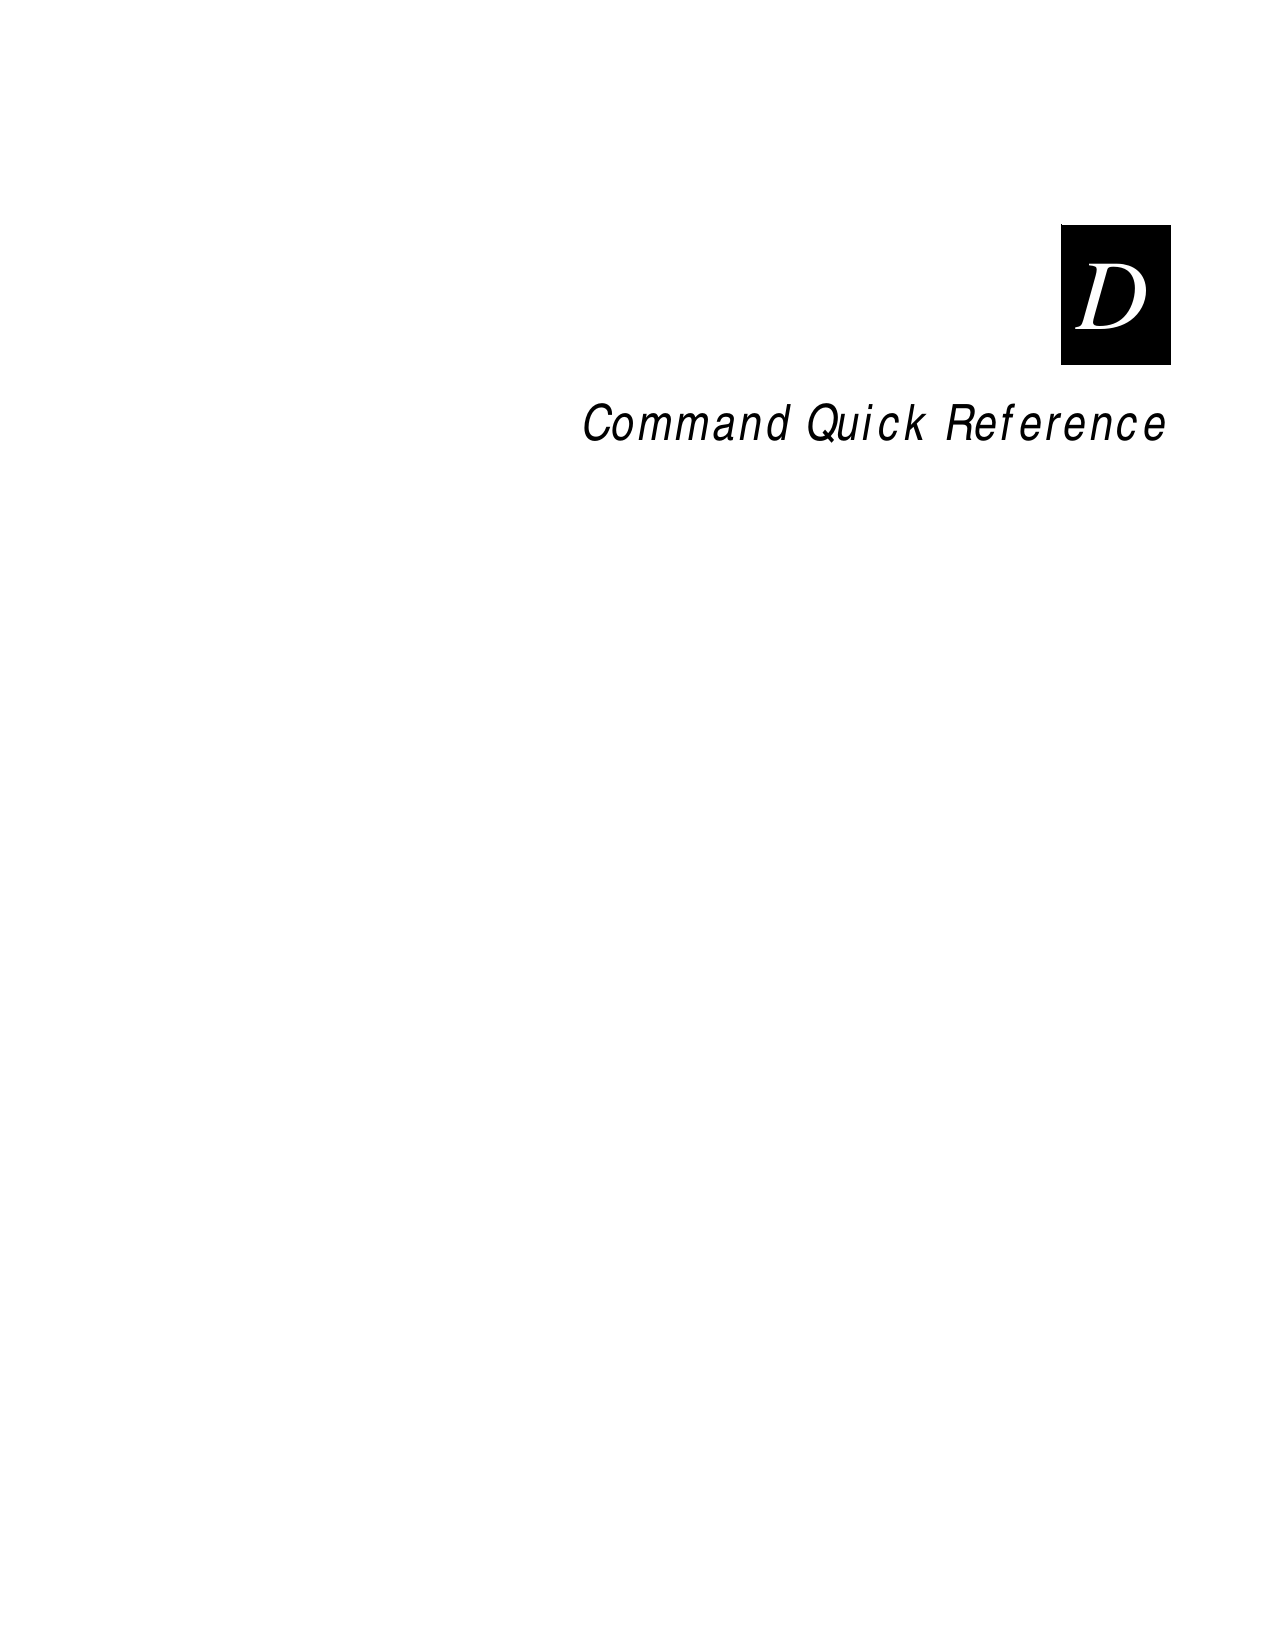  DCommand Quick Reference